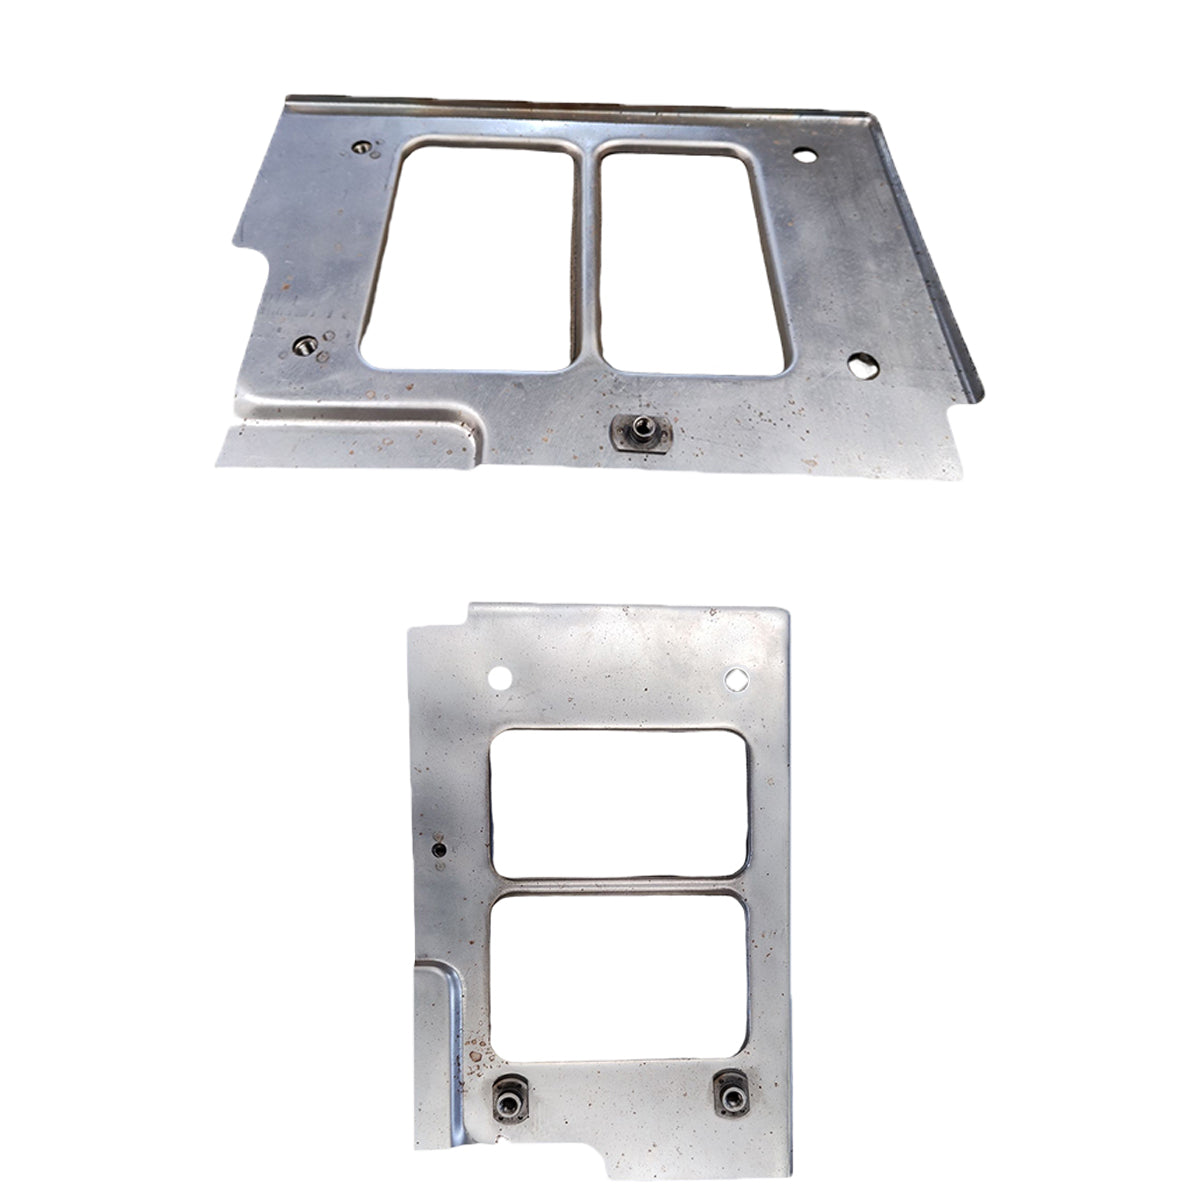 Panel with A/C Opennings, for FJ40, FJ45 Toyota Land Cruiser